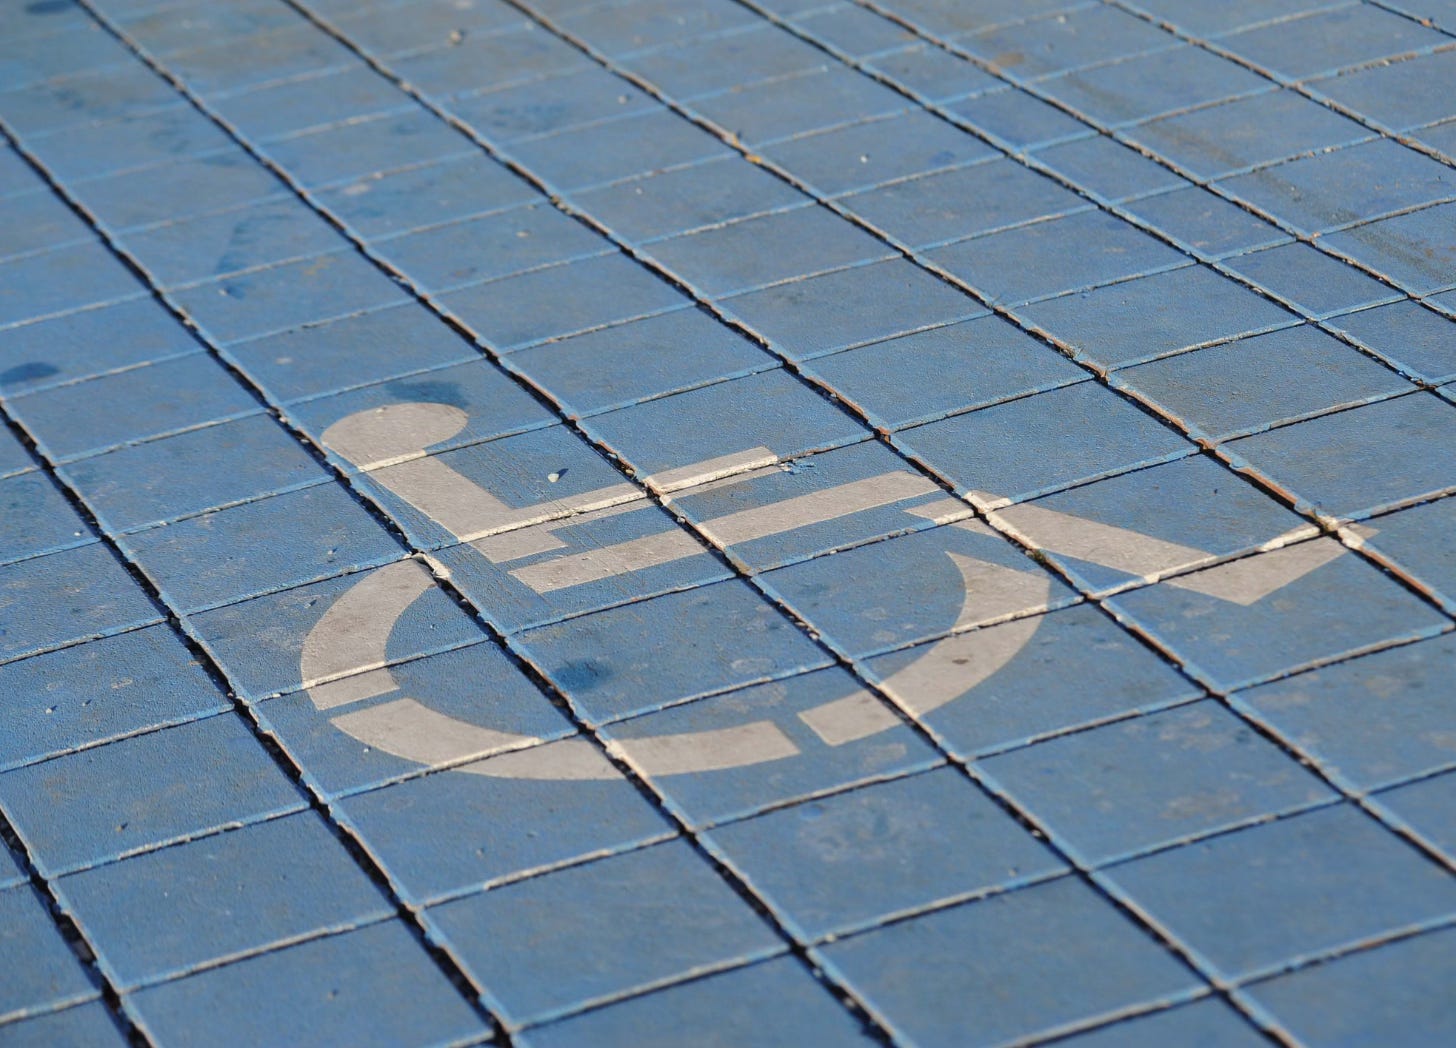 Wheelchair symbol marked on a tiled floor